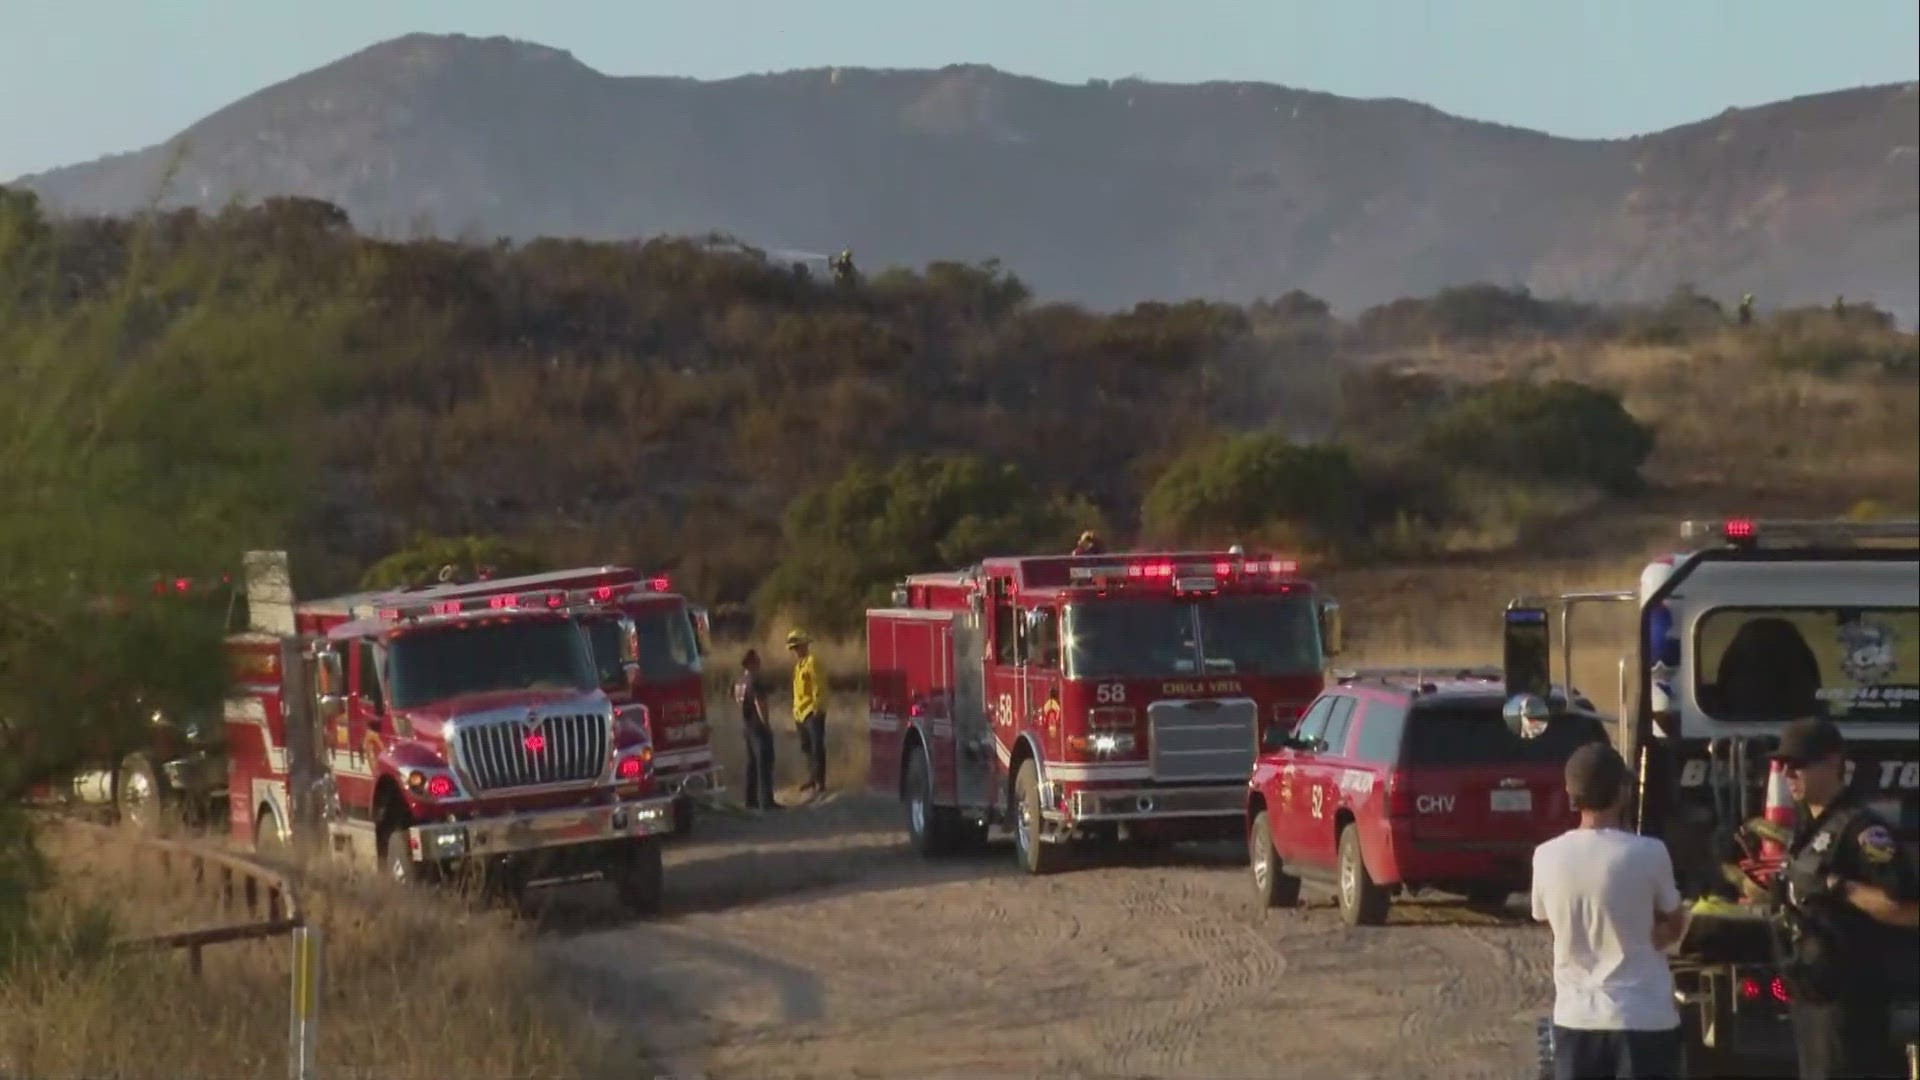 By 6:30 p.m., the fire had grown from a half acre to over 15 acres according to San Diego Sheriff.